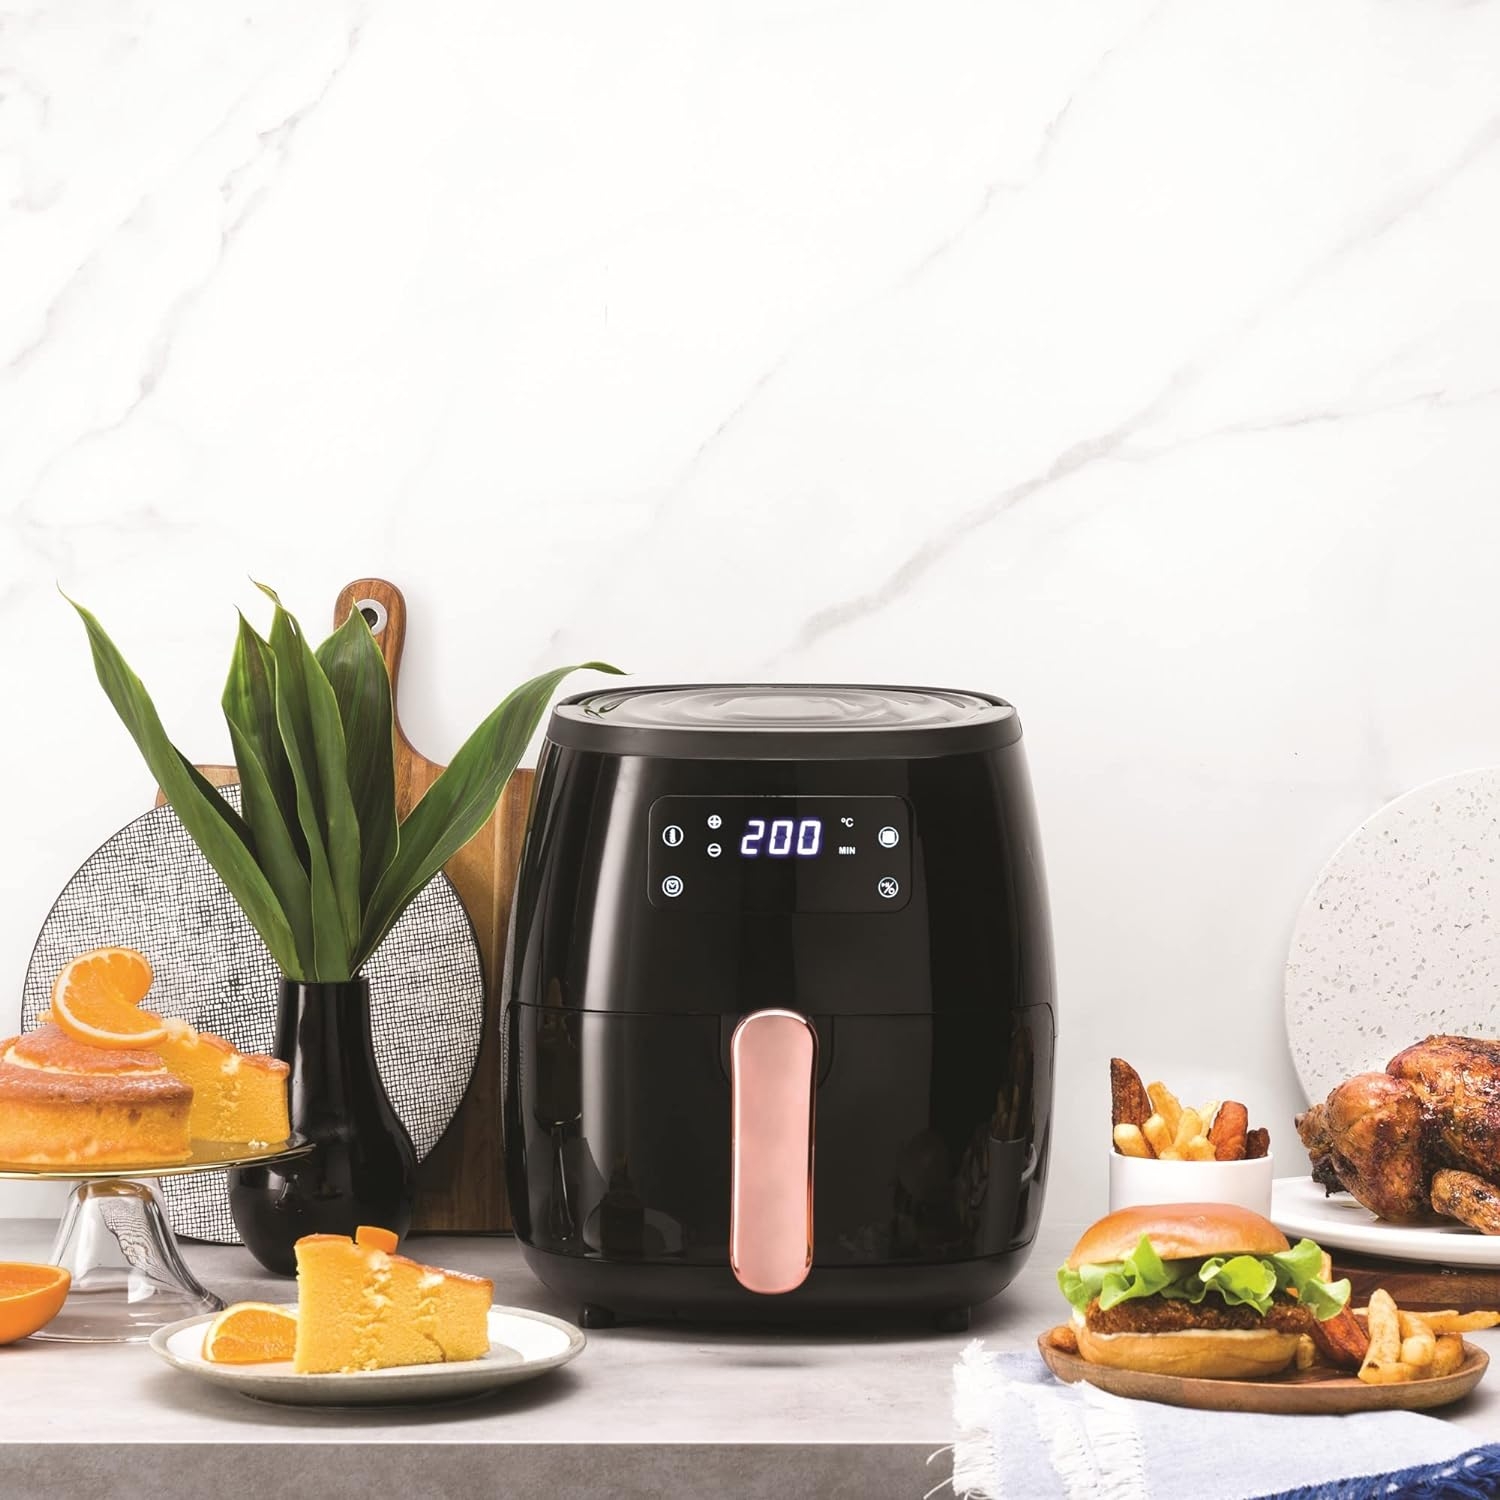 The Russell Hobbs Brooklyn Digital Air Fryer cooks your favourite foods up  to 82% faster* with little or no added oil, while saving up to…